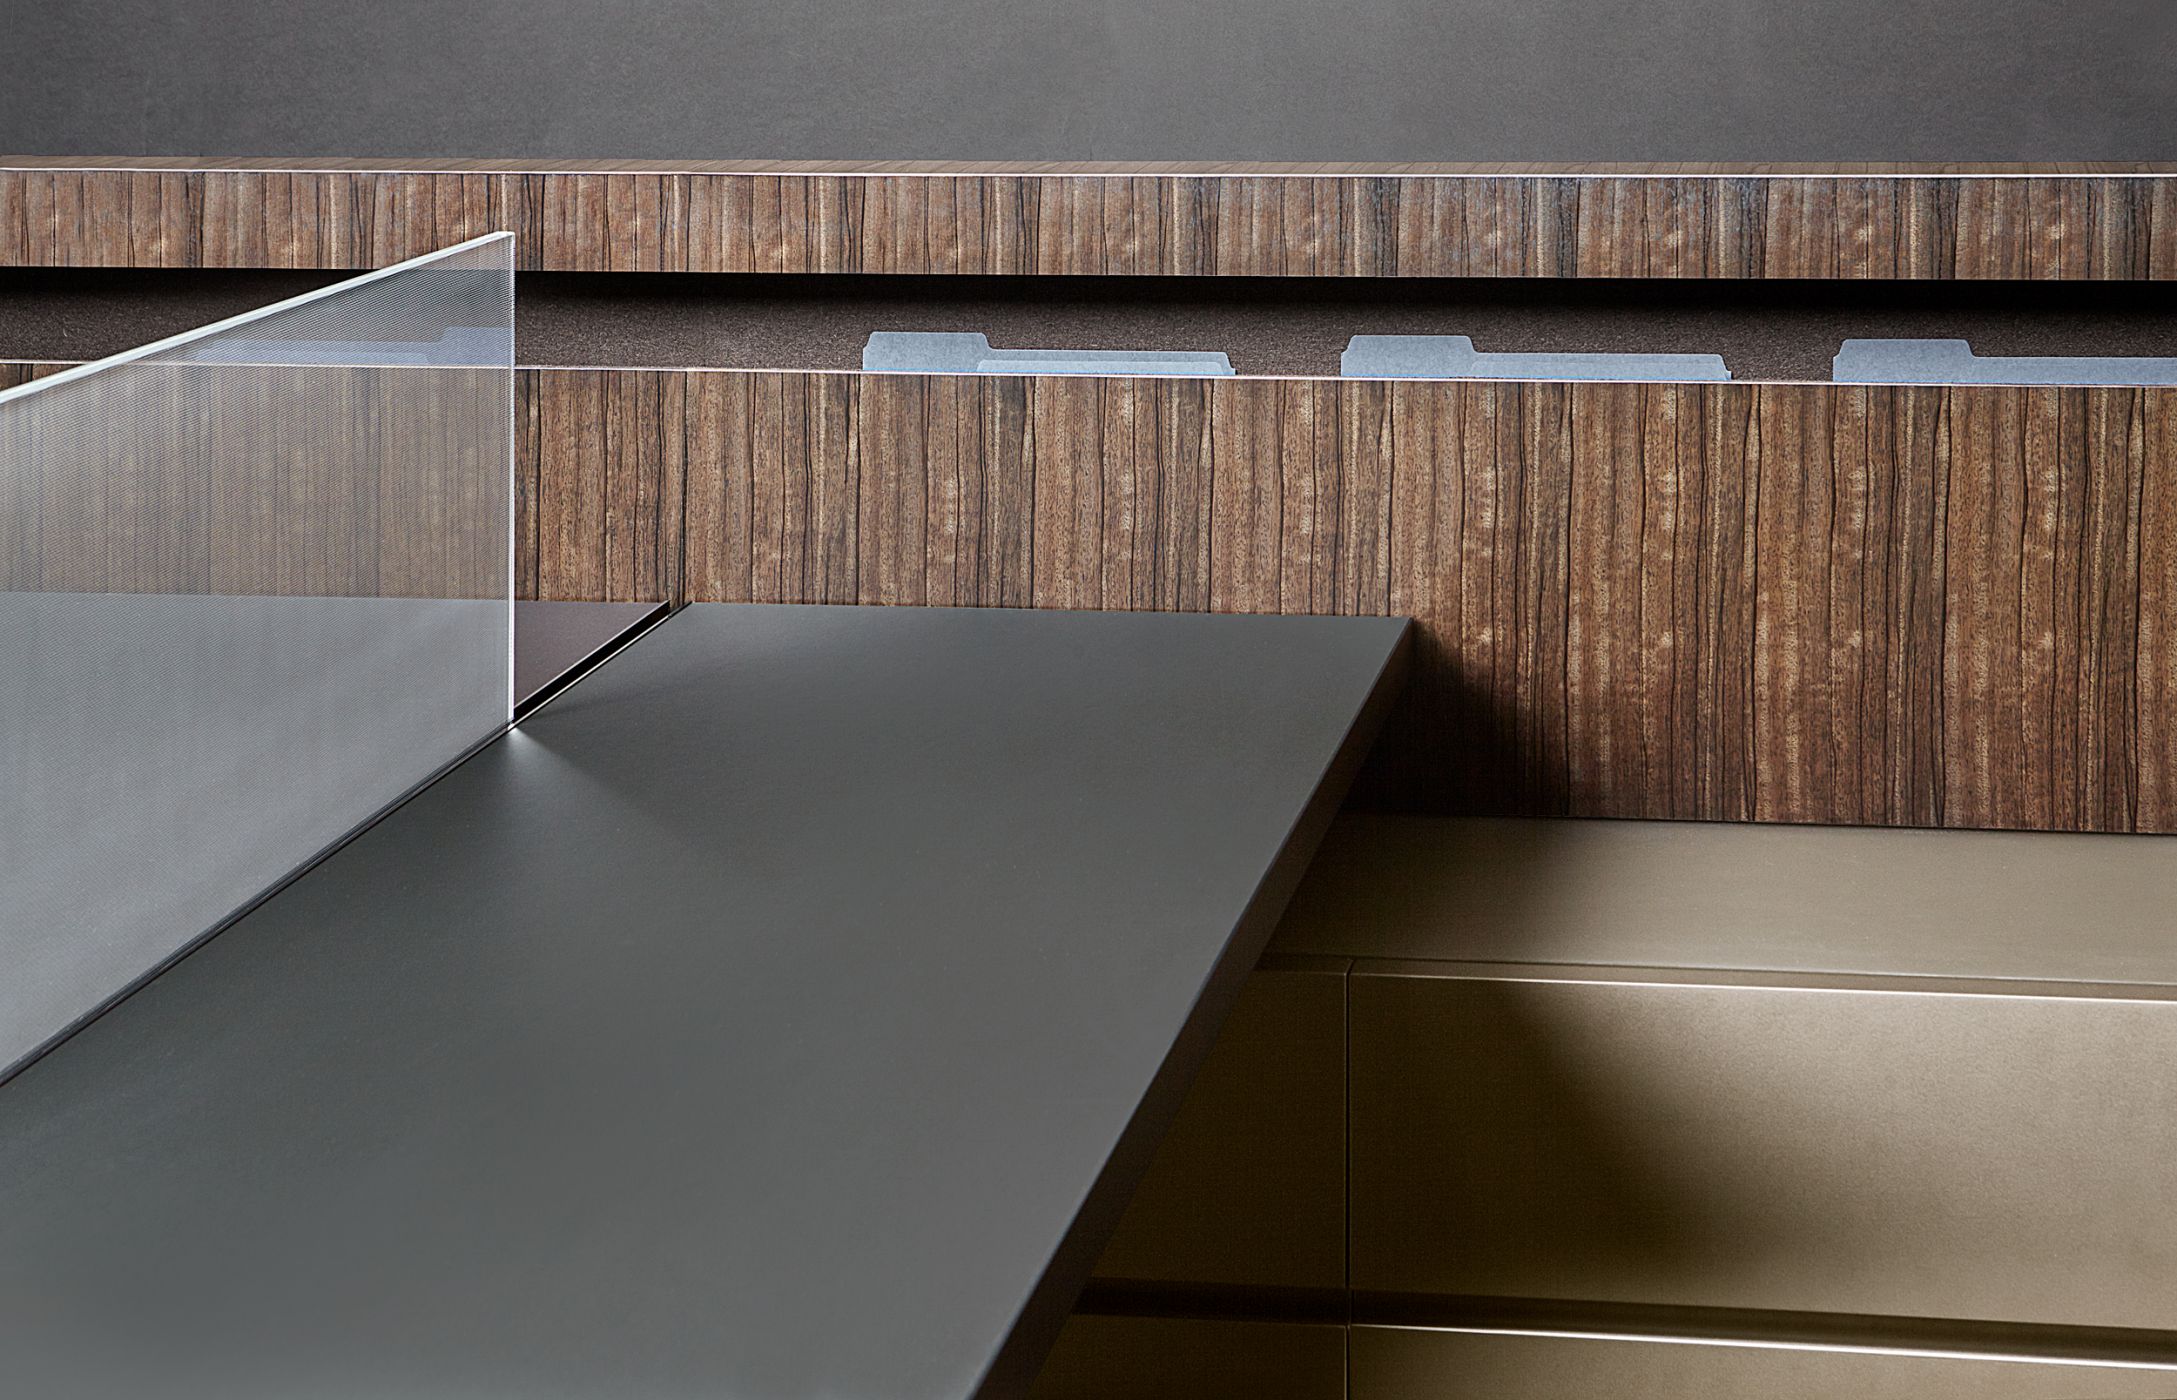 Foundry showcases a harmonious use of materials, surfaces, and textures.